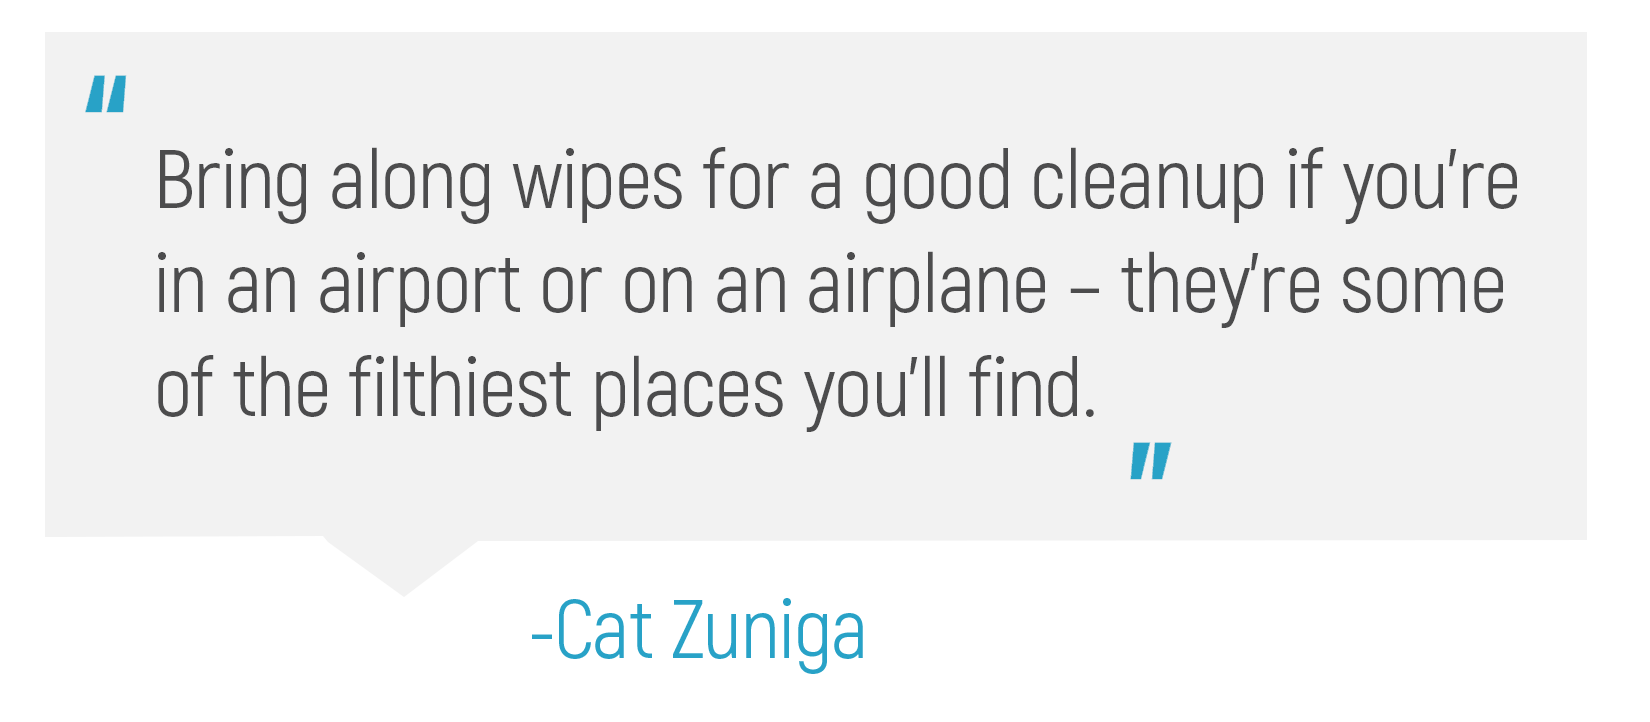 "Bring along wipes for a good cleanup if you're in an airport or on an airplane - they're some of the filthiest places you'll find."